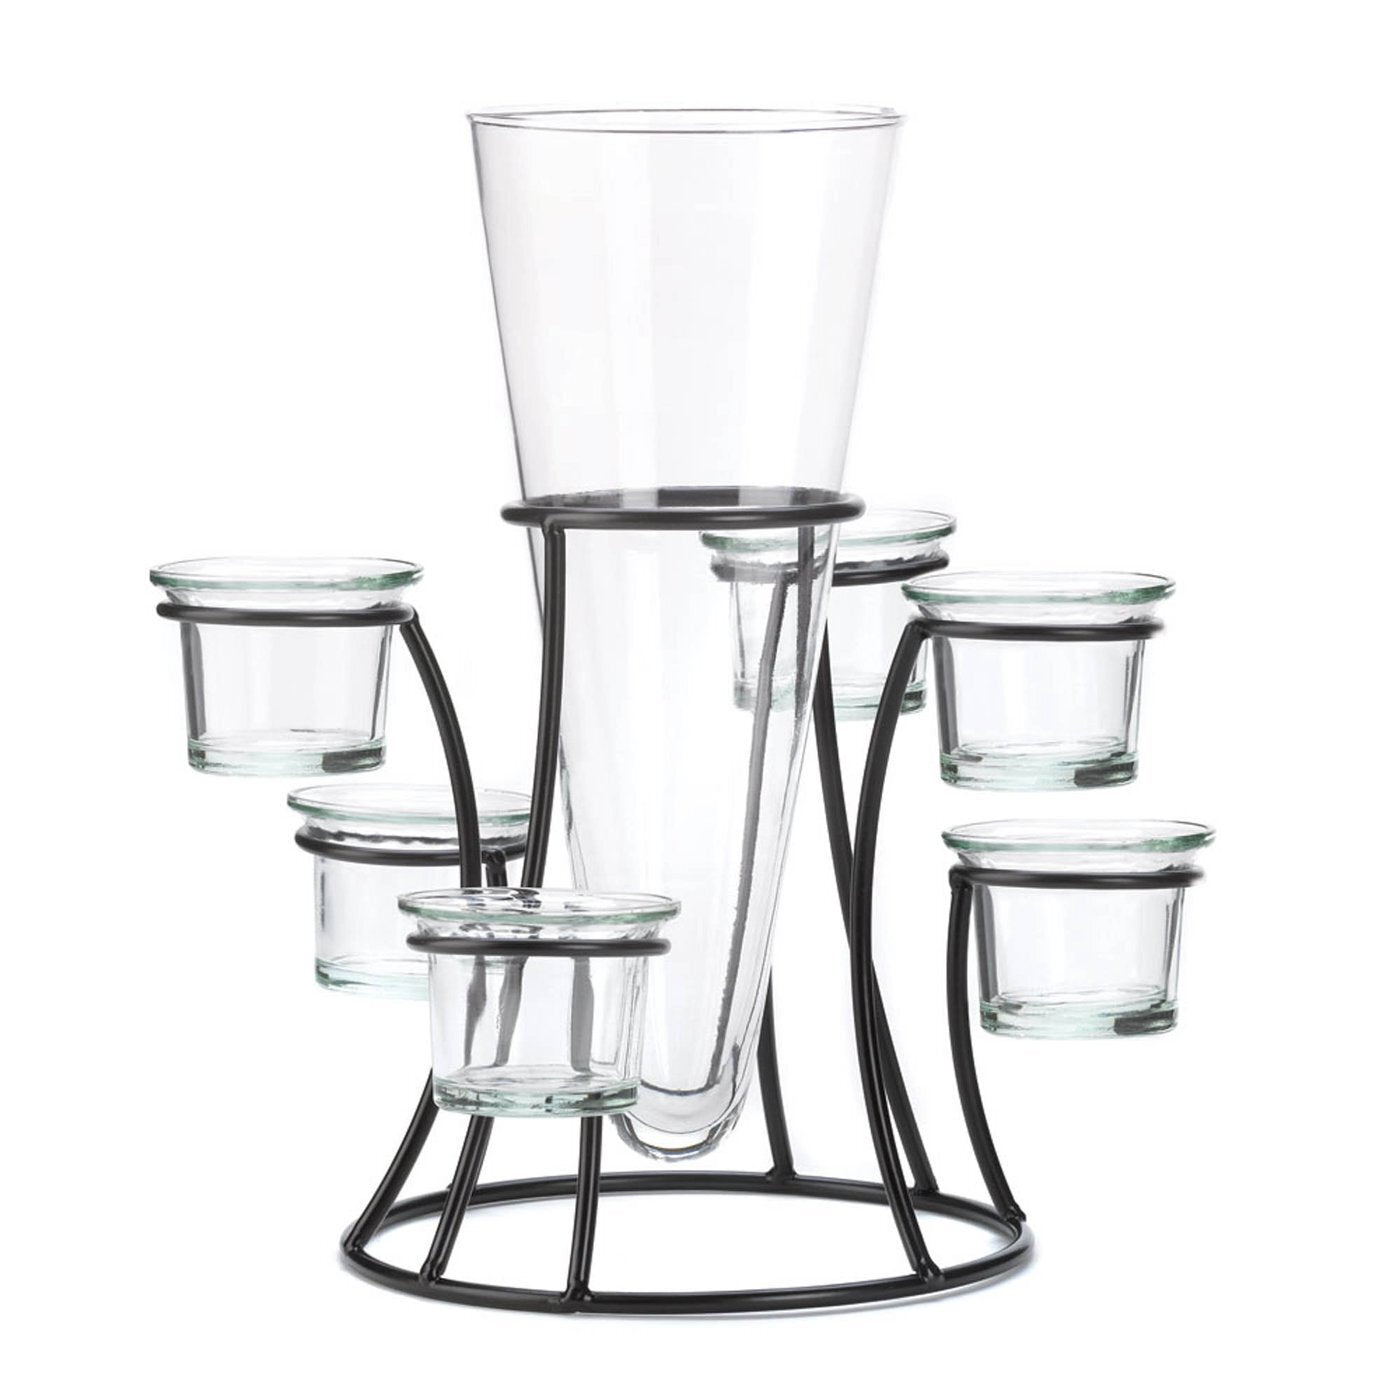 Glass Vase with Six Glass Candle Holders